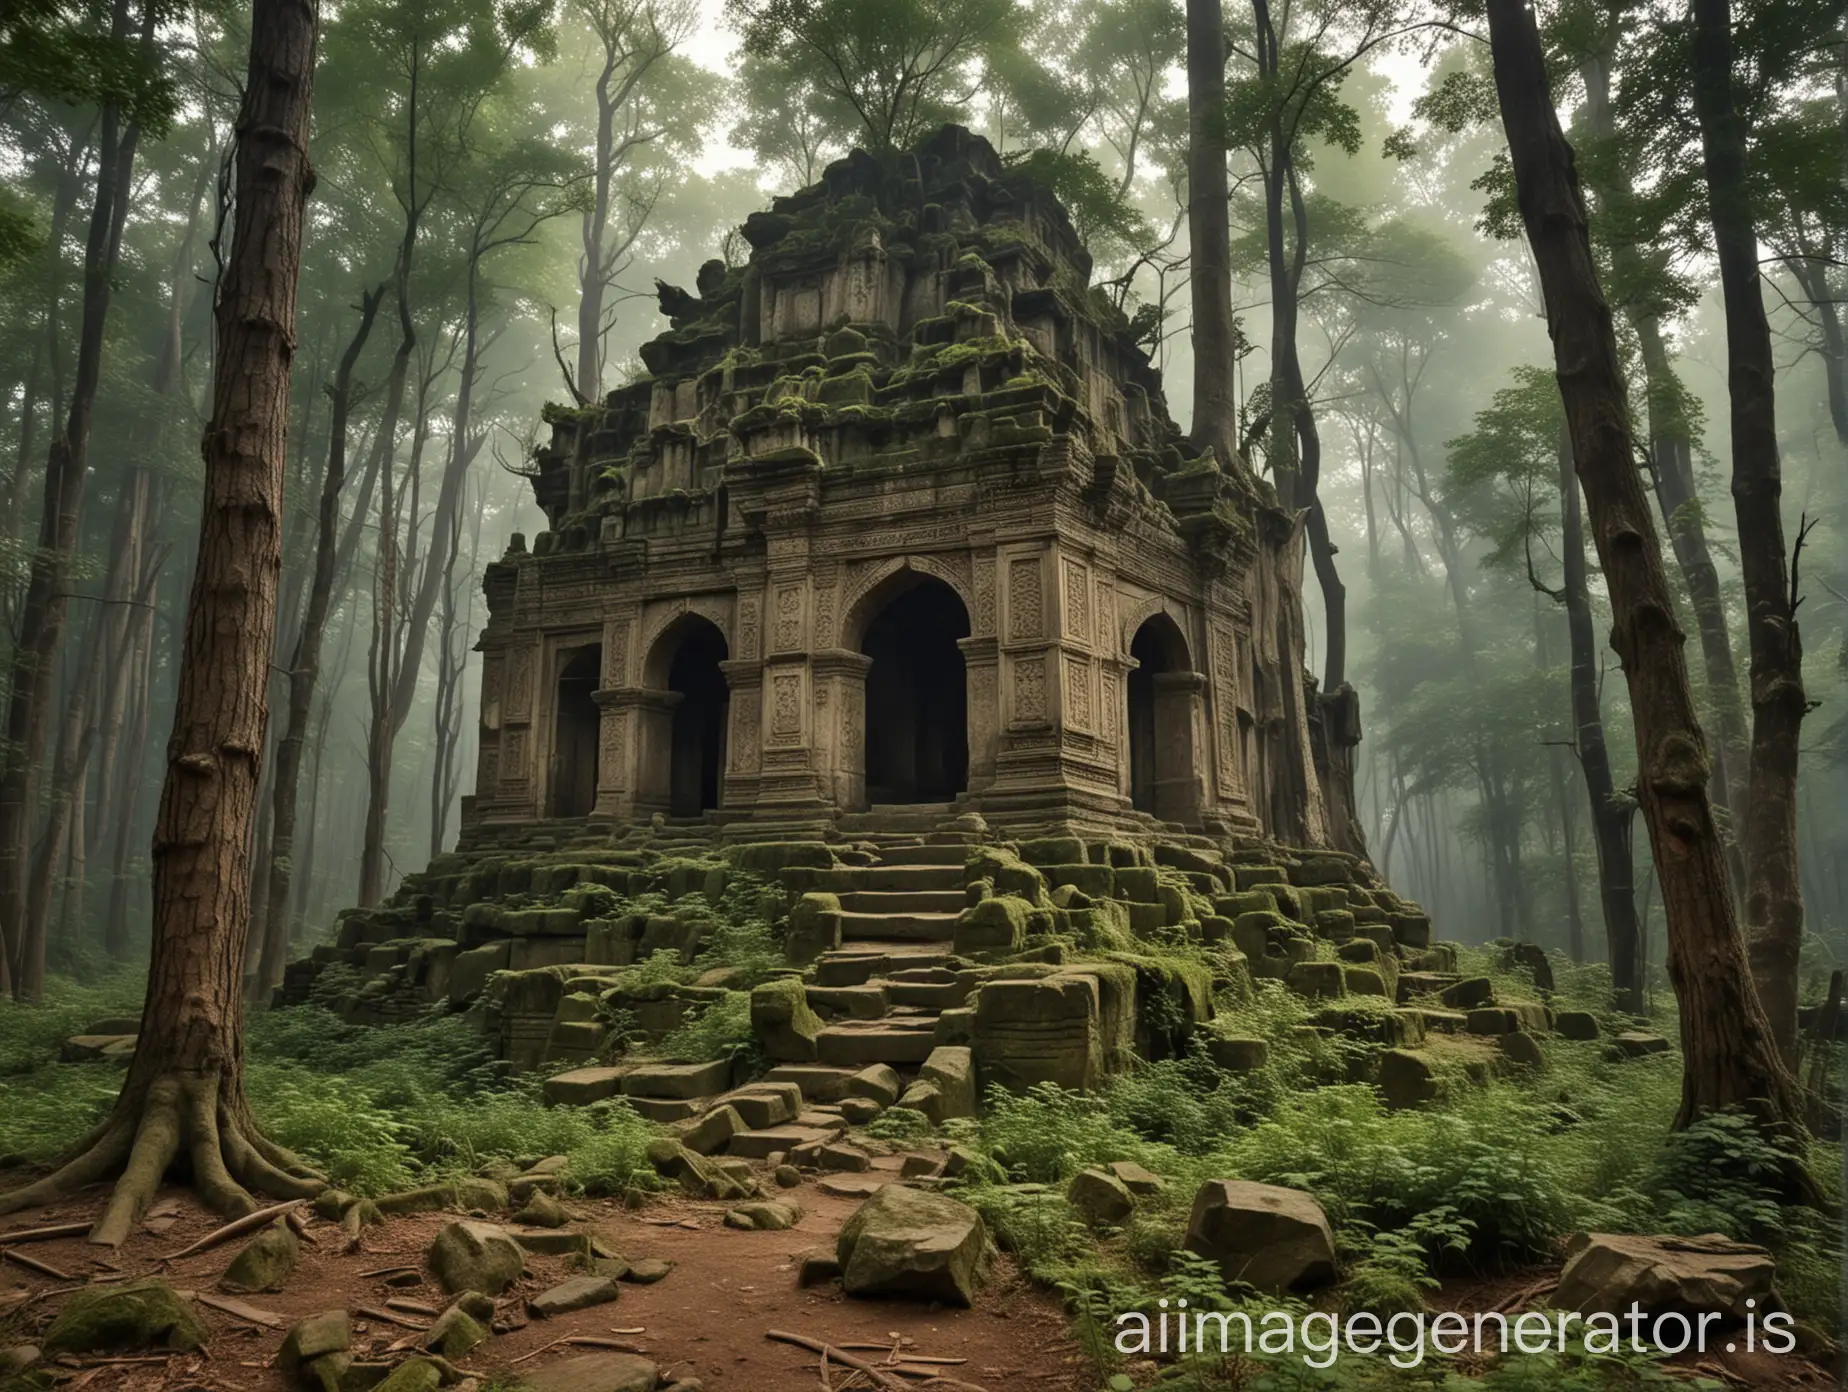 in the soaring and majestic forest, the ancient mystery, grand and strange of Eastern historical relics